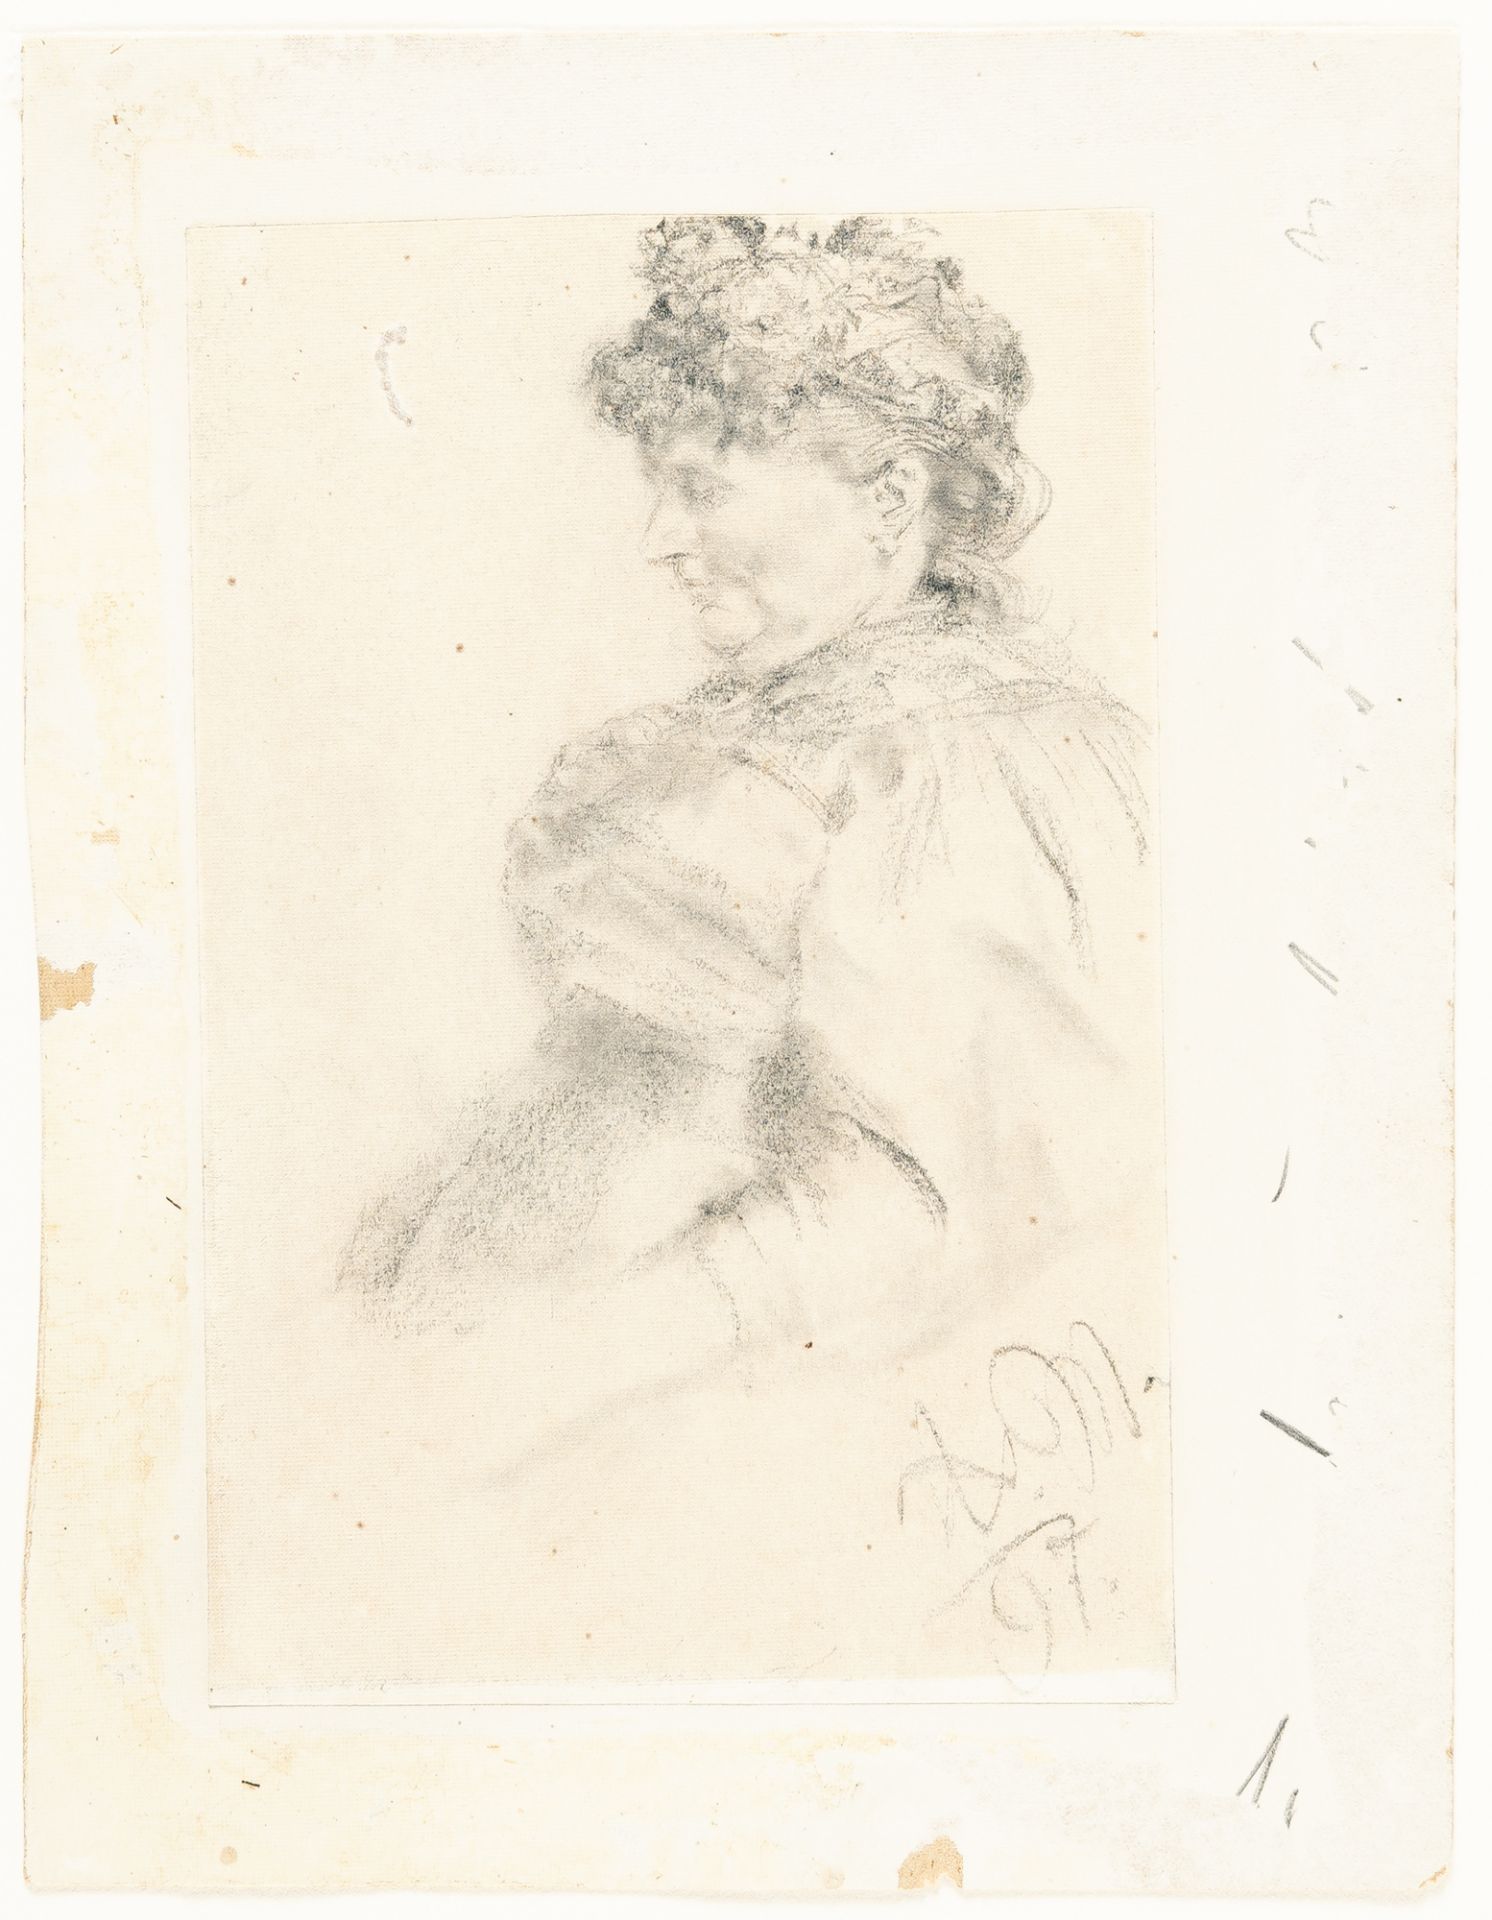 Adolph Menzel, S.eated woman in profile facing left.Pencil, partially smudged, on wove, laid down on - Image 2 of 3